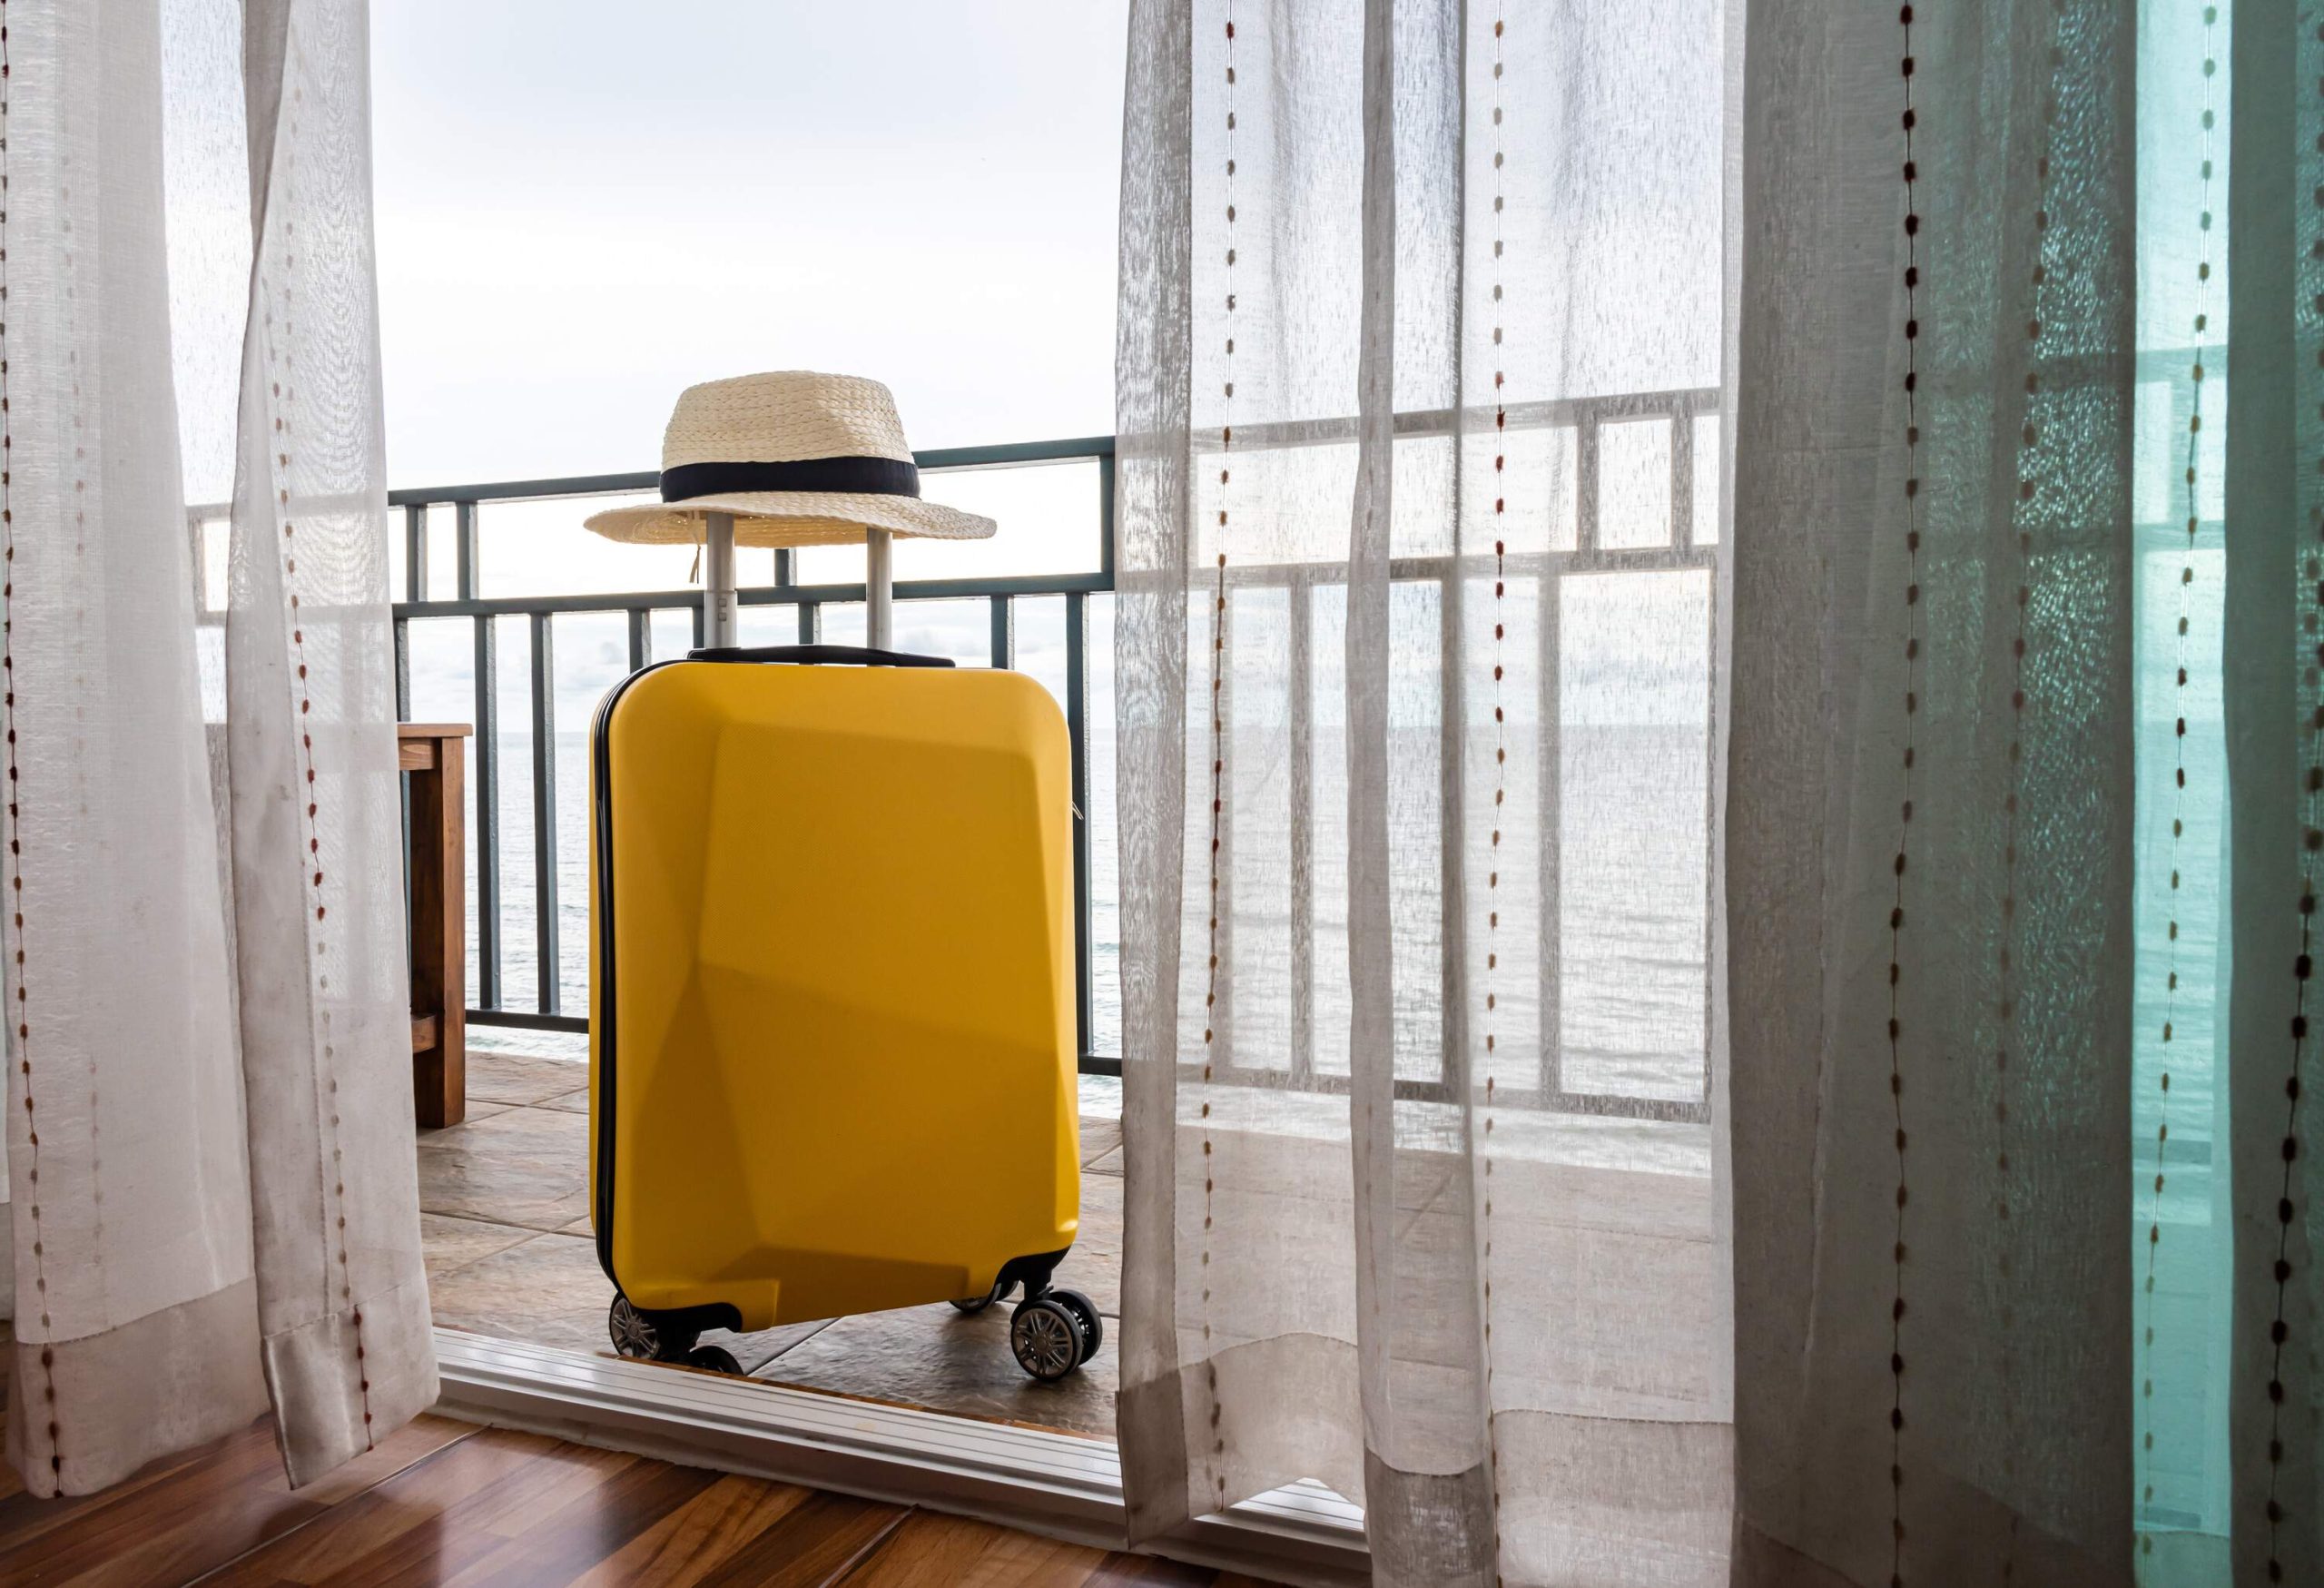 A bright yellow suitcase with a hat on its handle standing on a patio behind the glass doors.